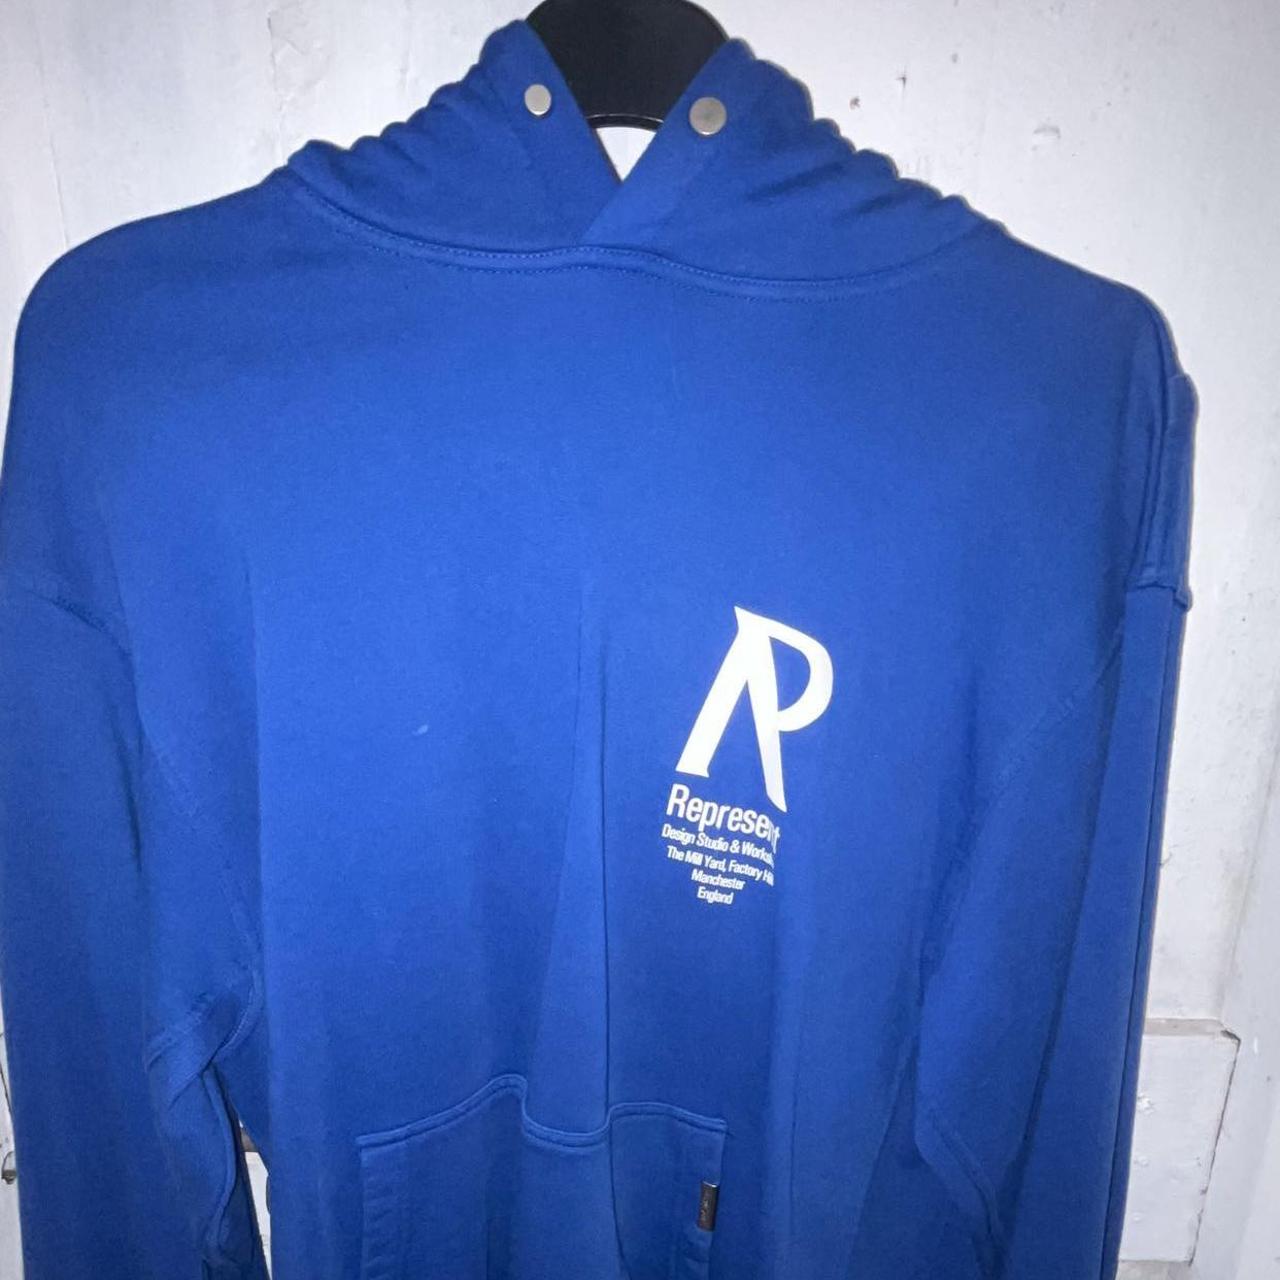 Represent cobalt blue colourway Size M Looking to... - Depop